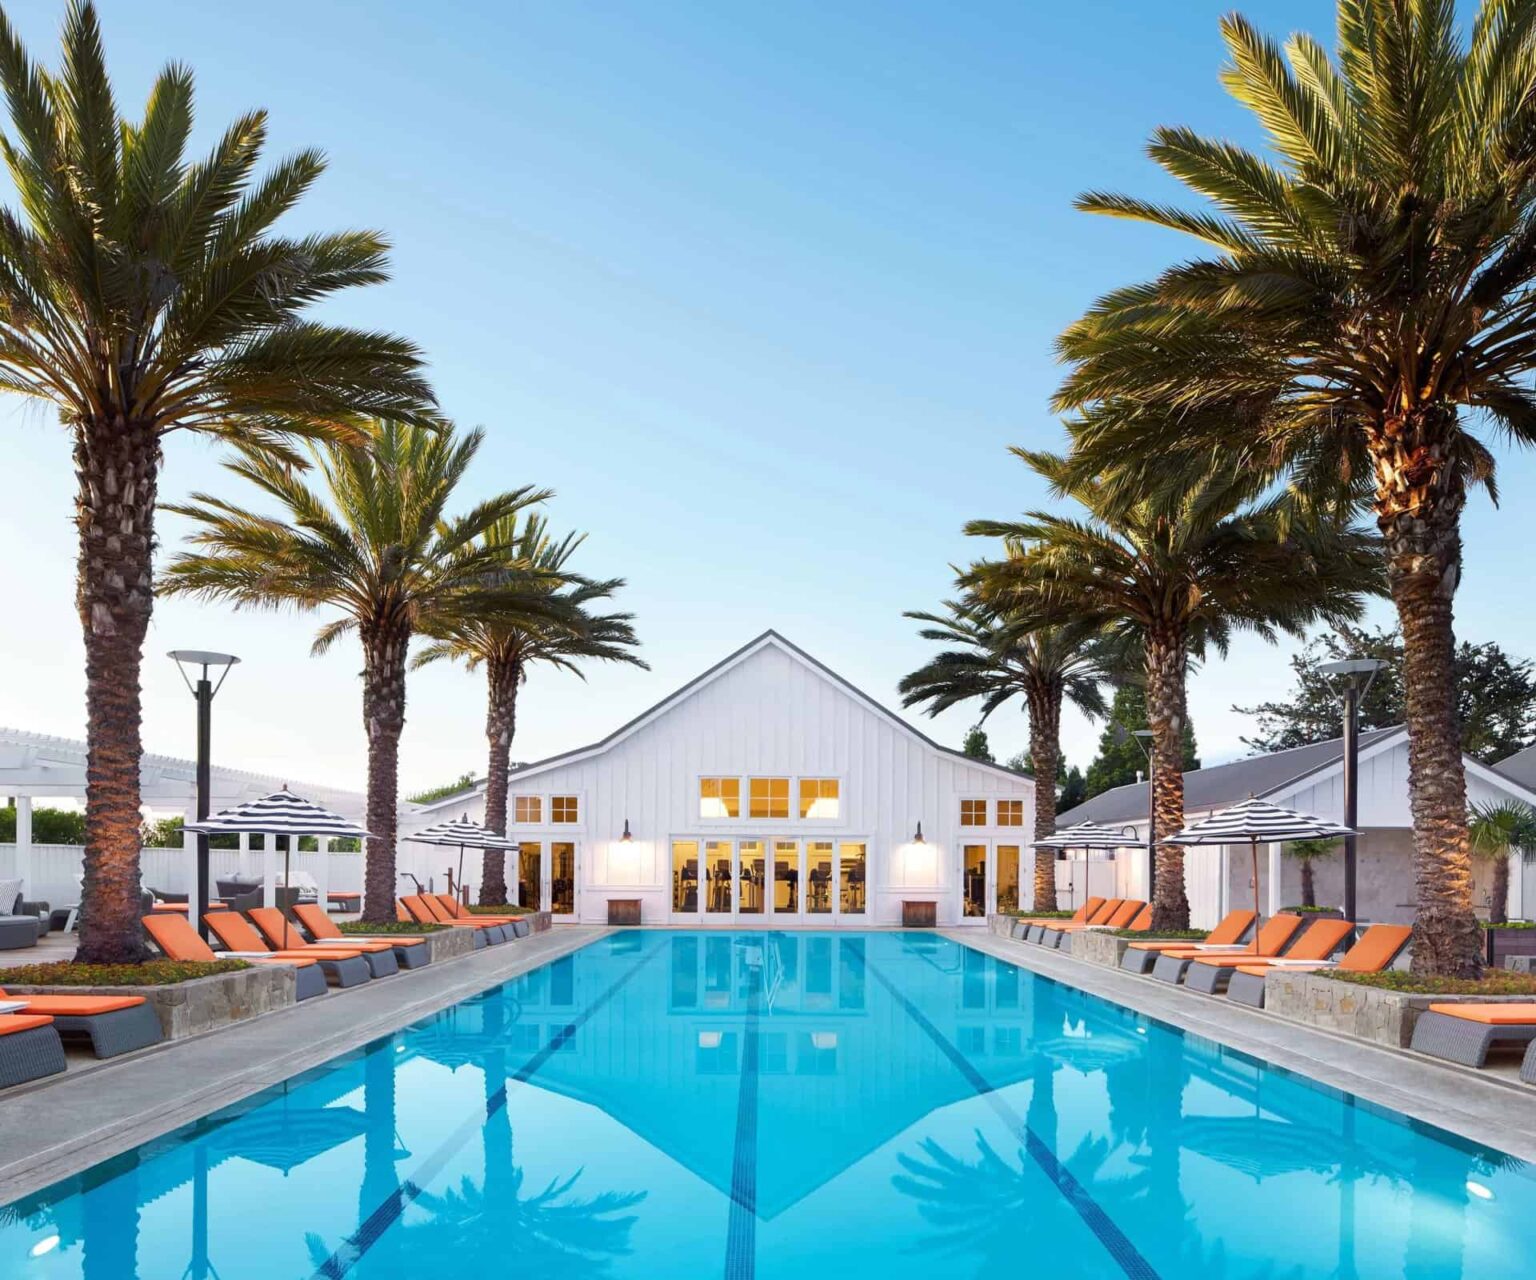 Carneros Resort & Spa pool surrounded by palm trees and sun loungers